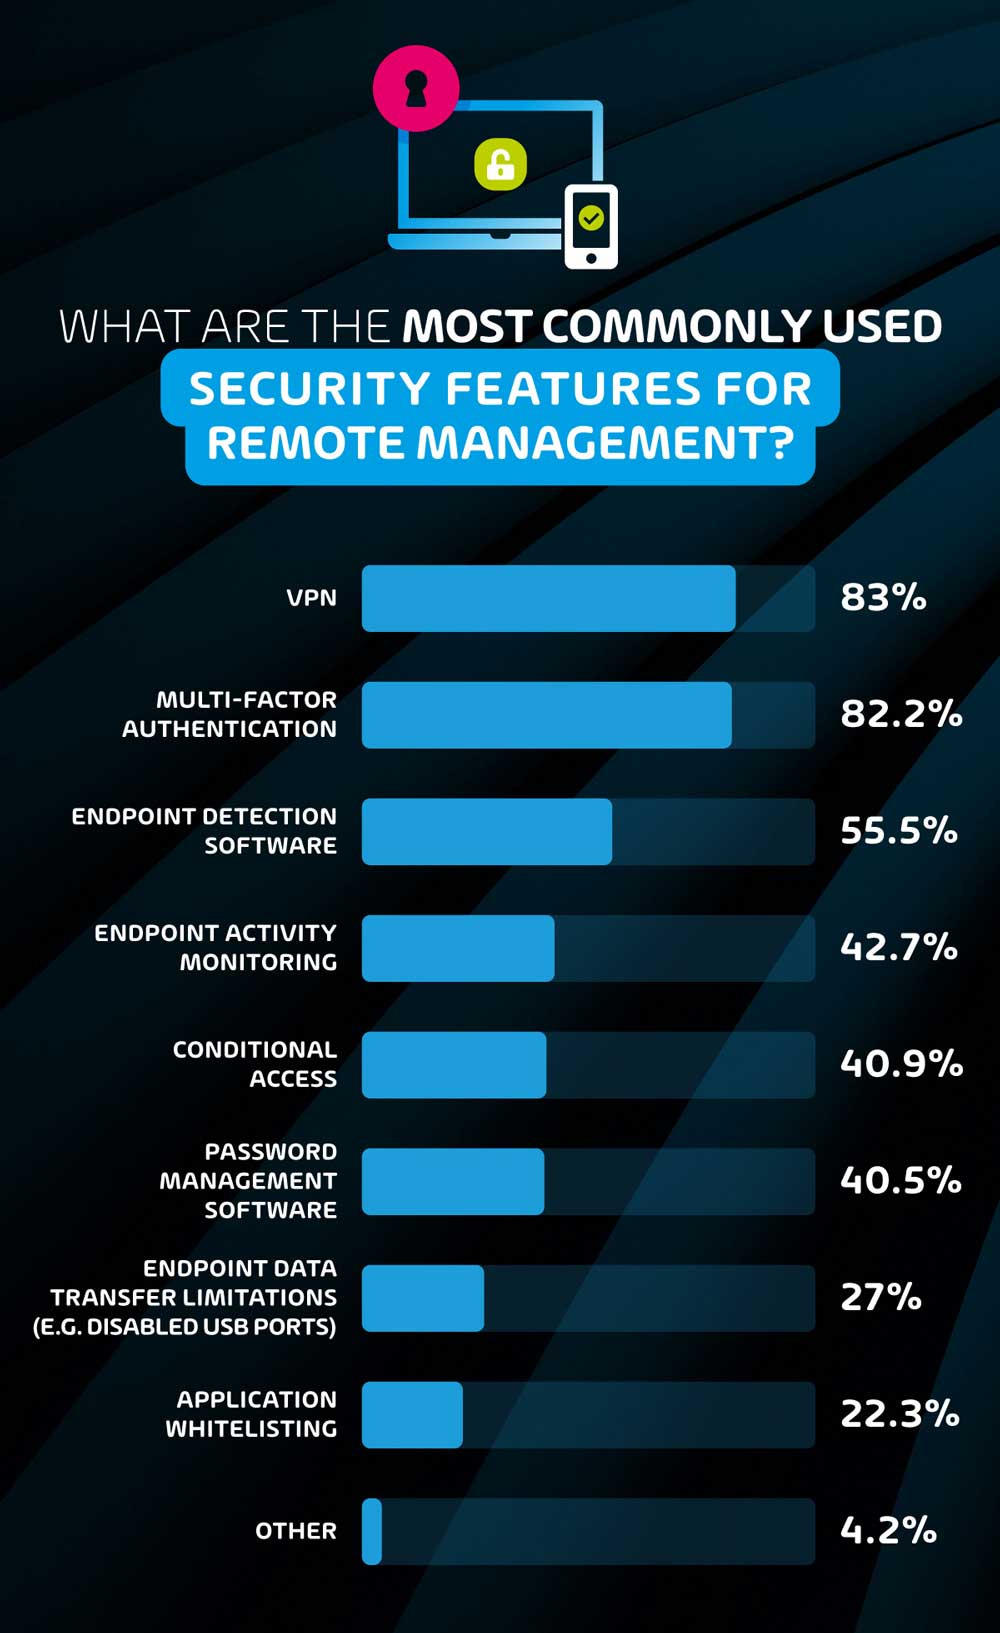 Most commonly used Security Features for Remote Management